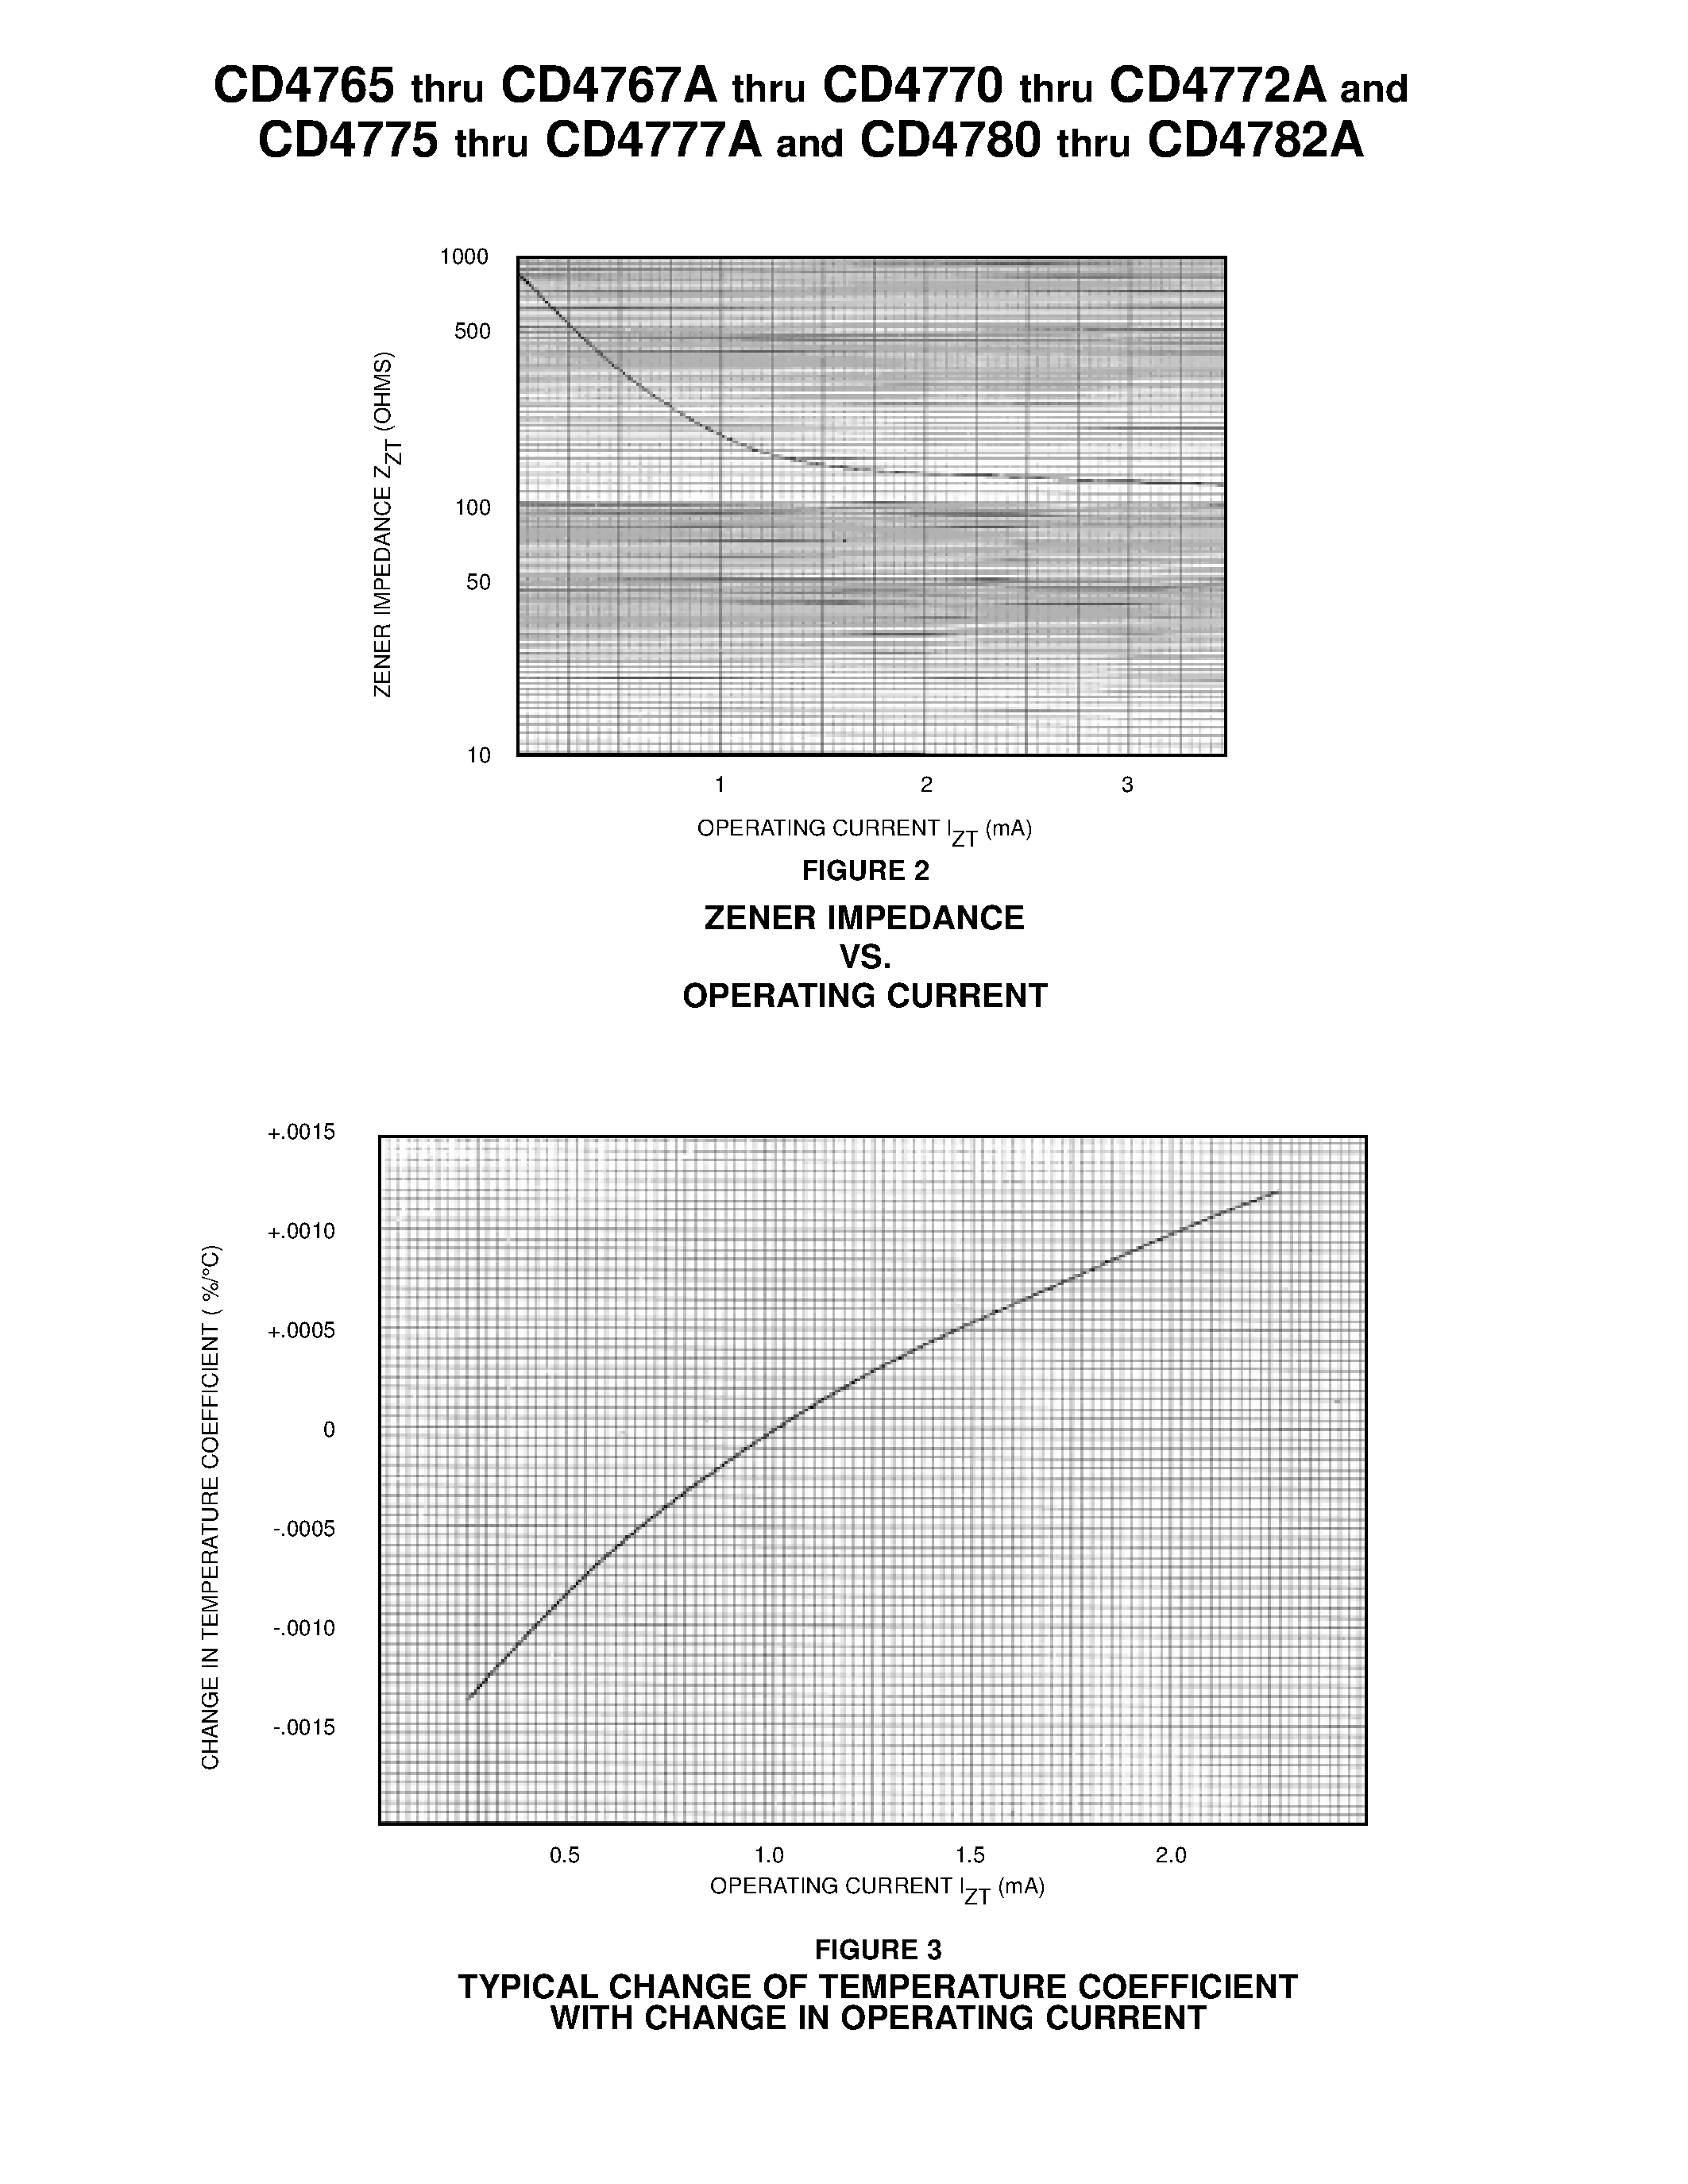 Datasheet CD4781 - MONOLITHIC TEMPERATURE COMPENSATED ZENER REFERENCE CHIPS page 2